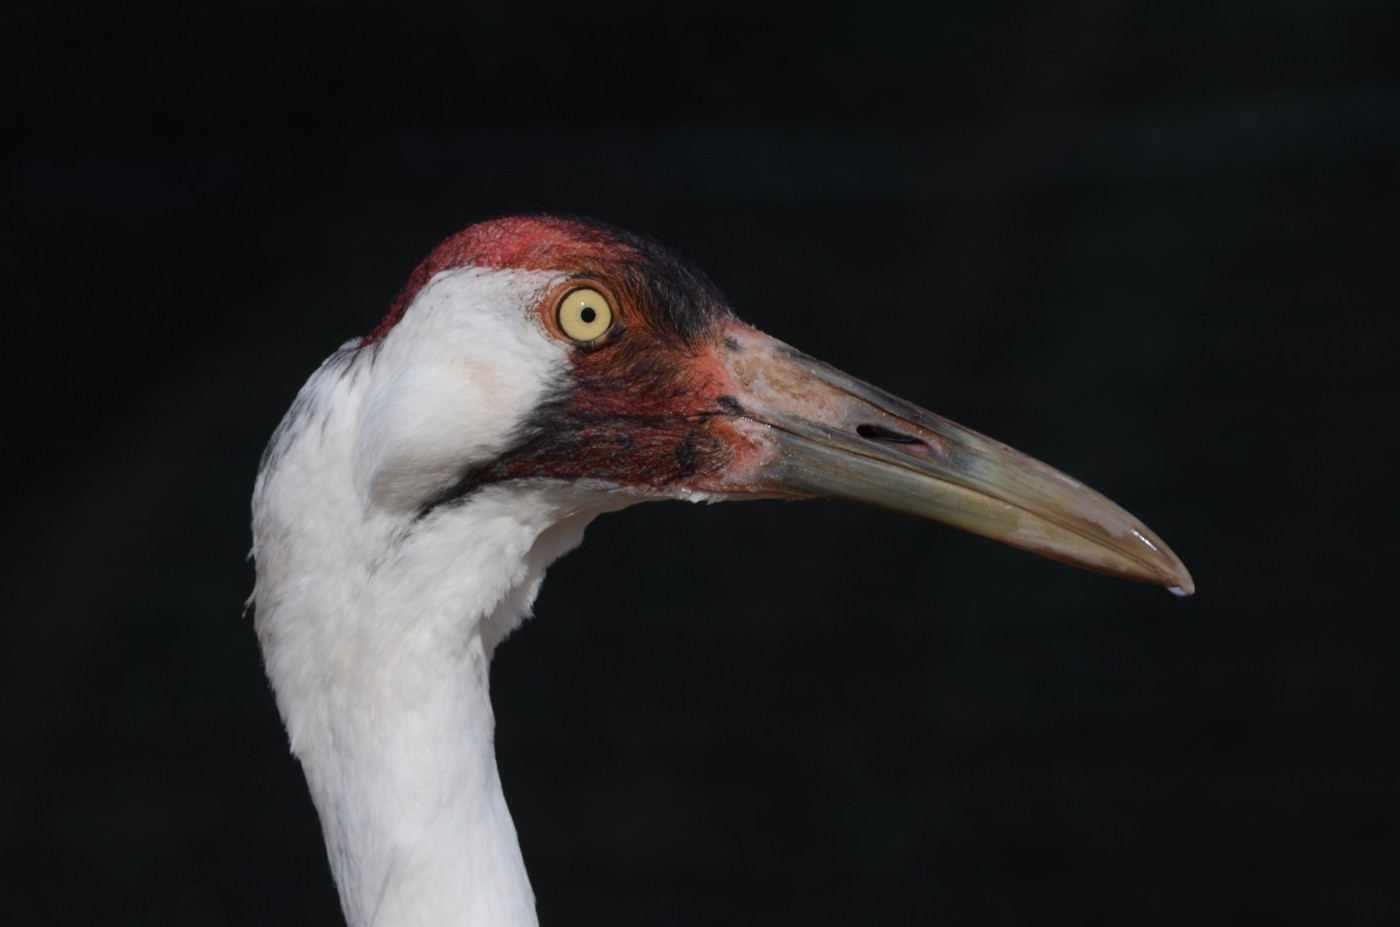 A close up of a whooping crane in profile.